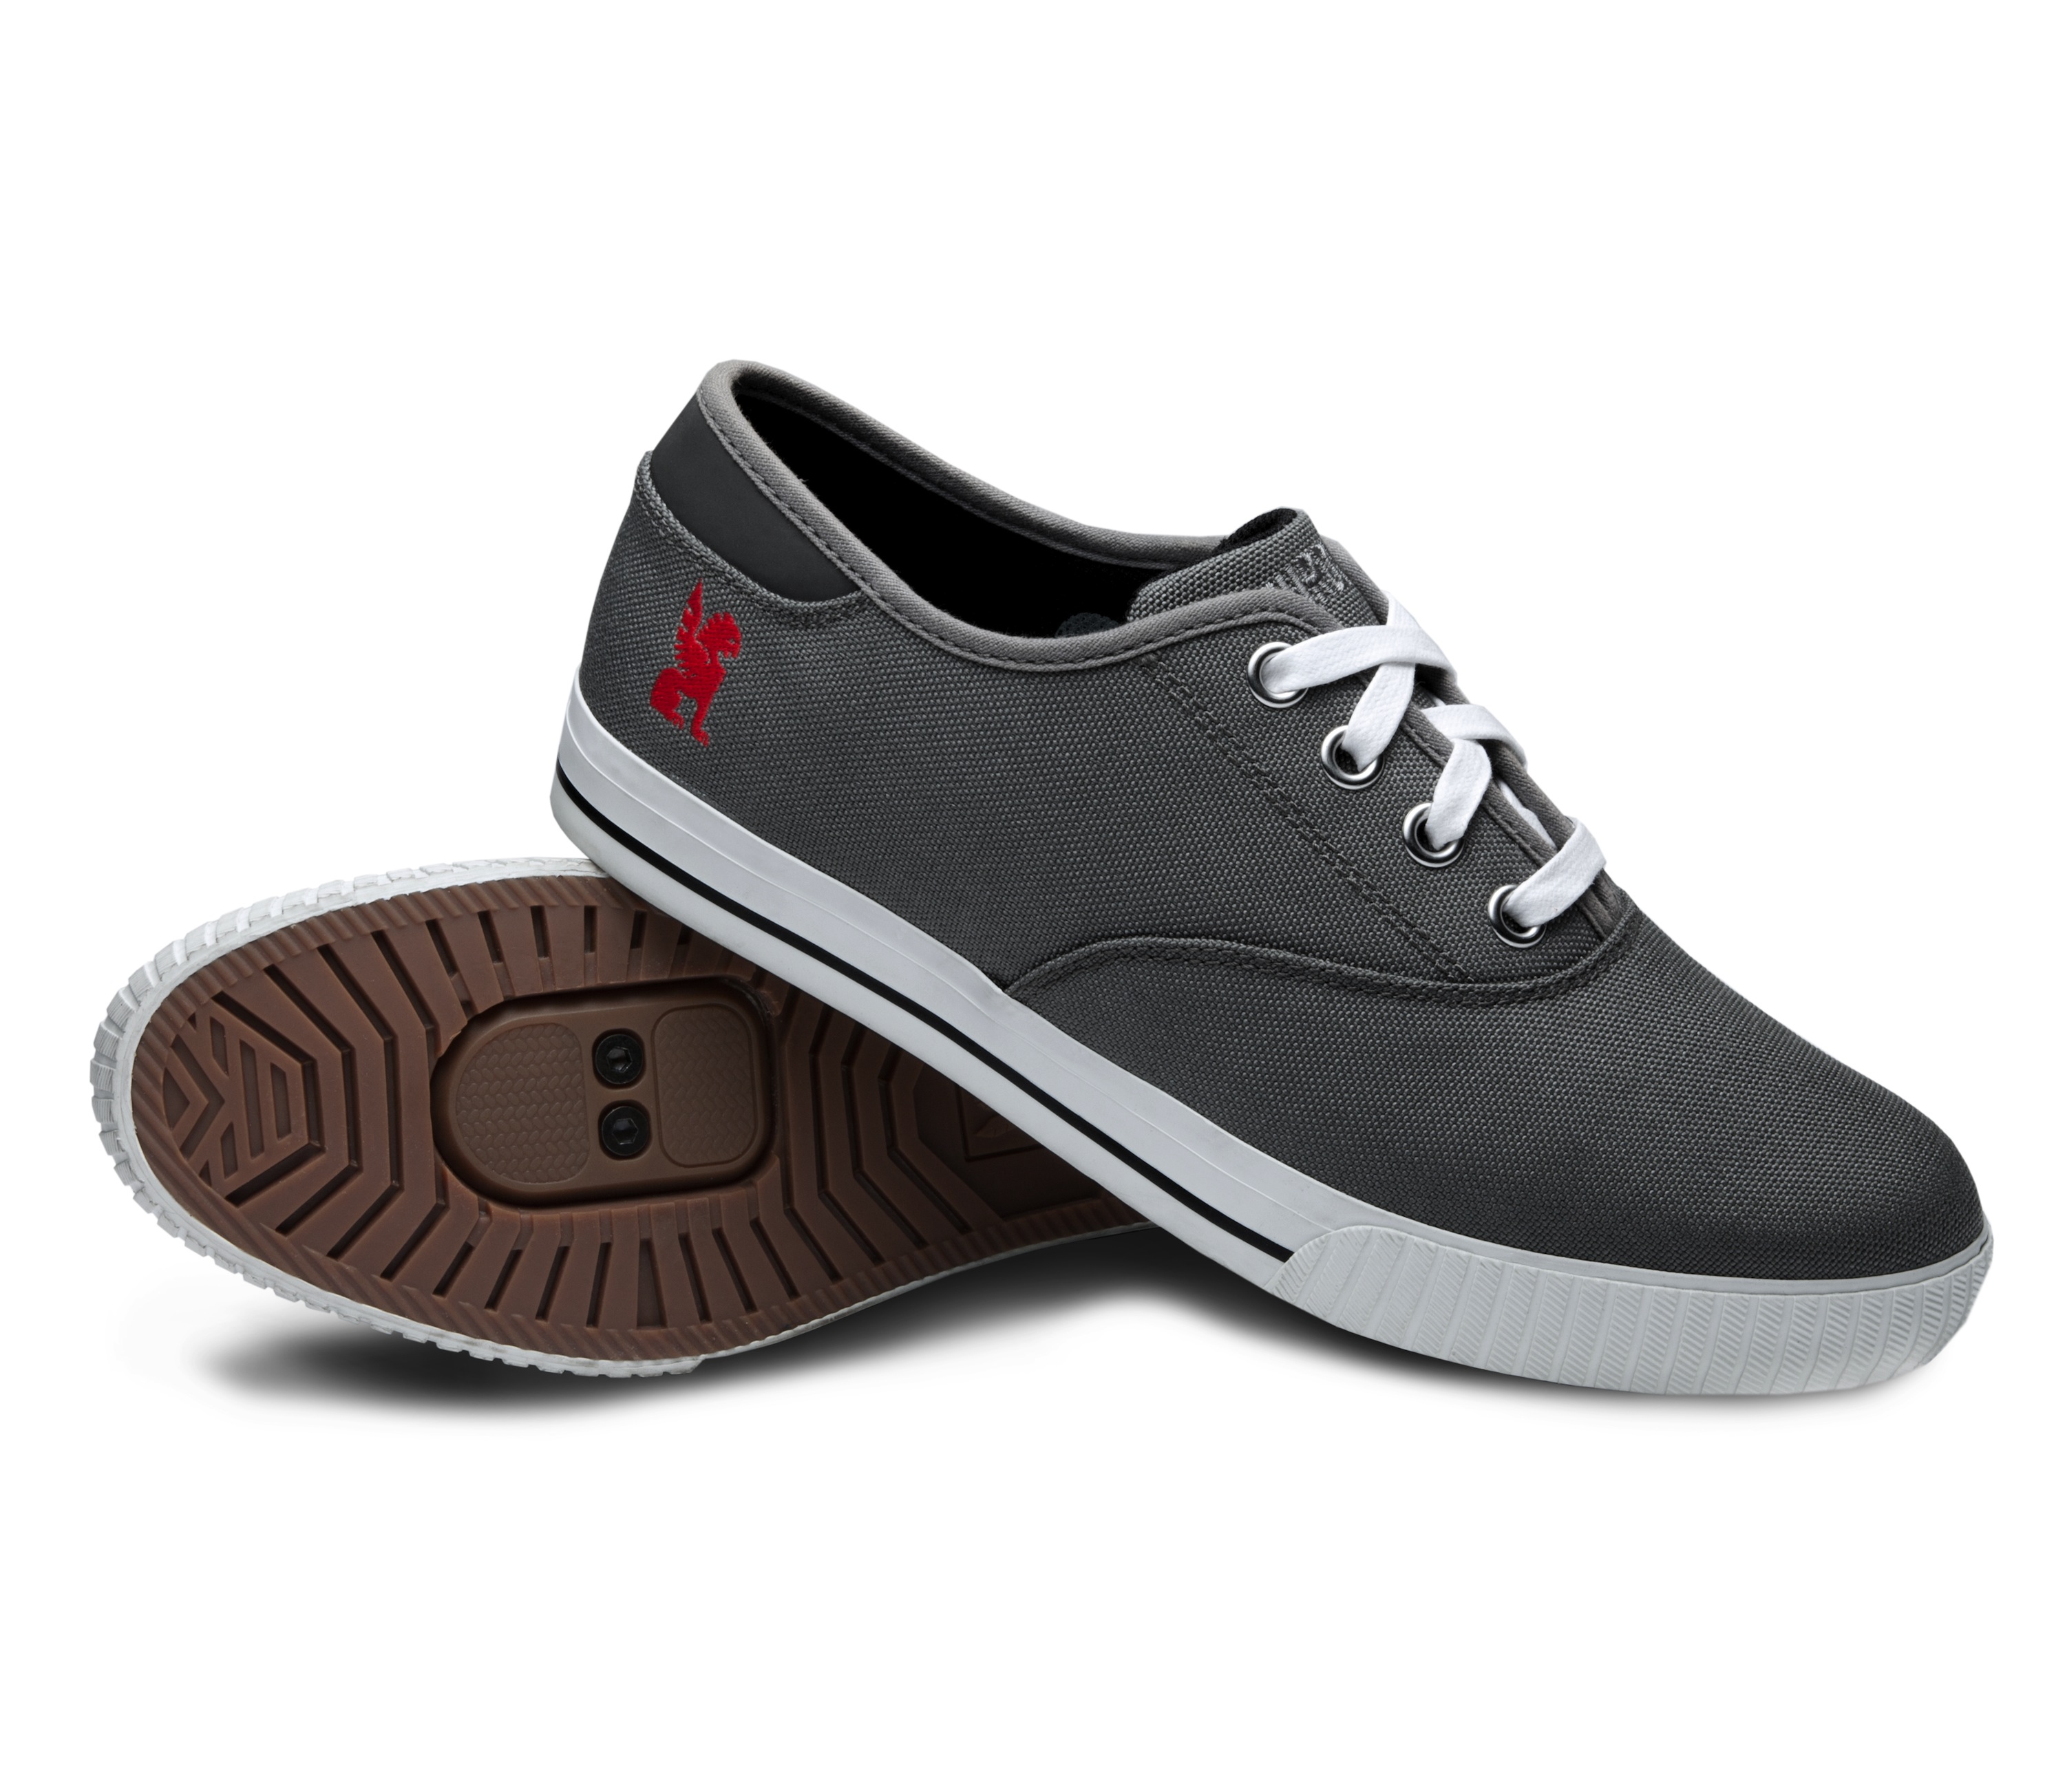 Chrome SPD shoe for the everyday commuter | Bicycle ...